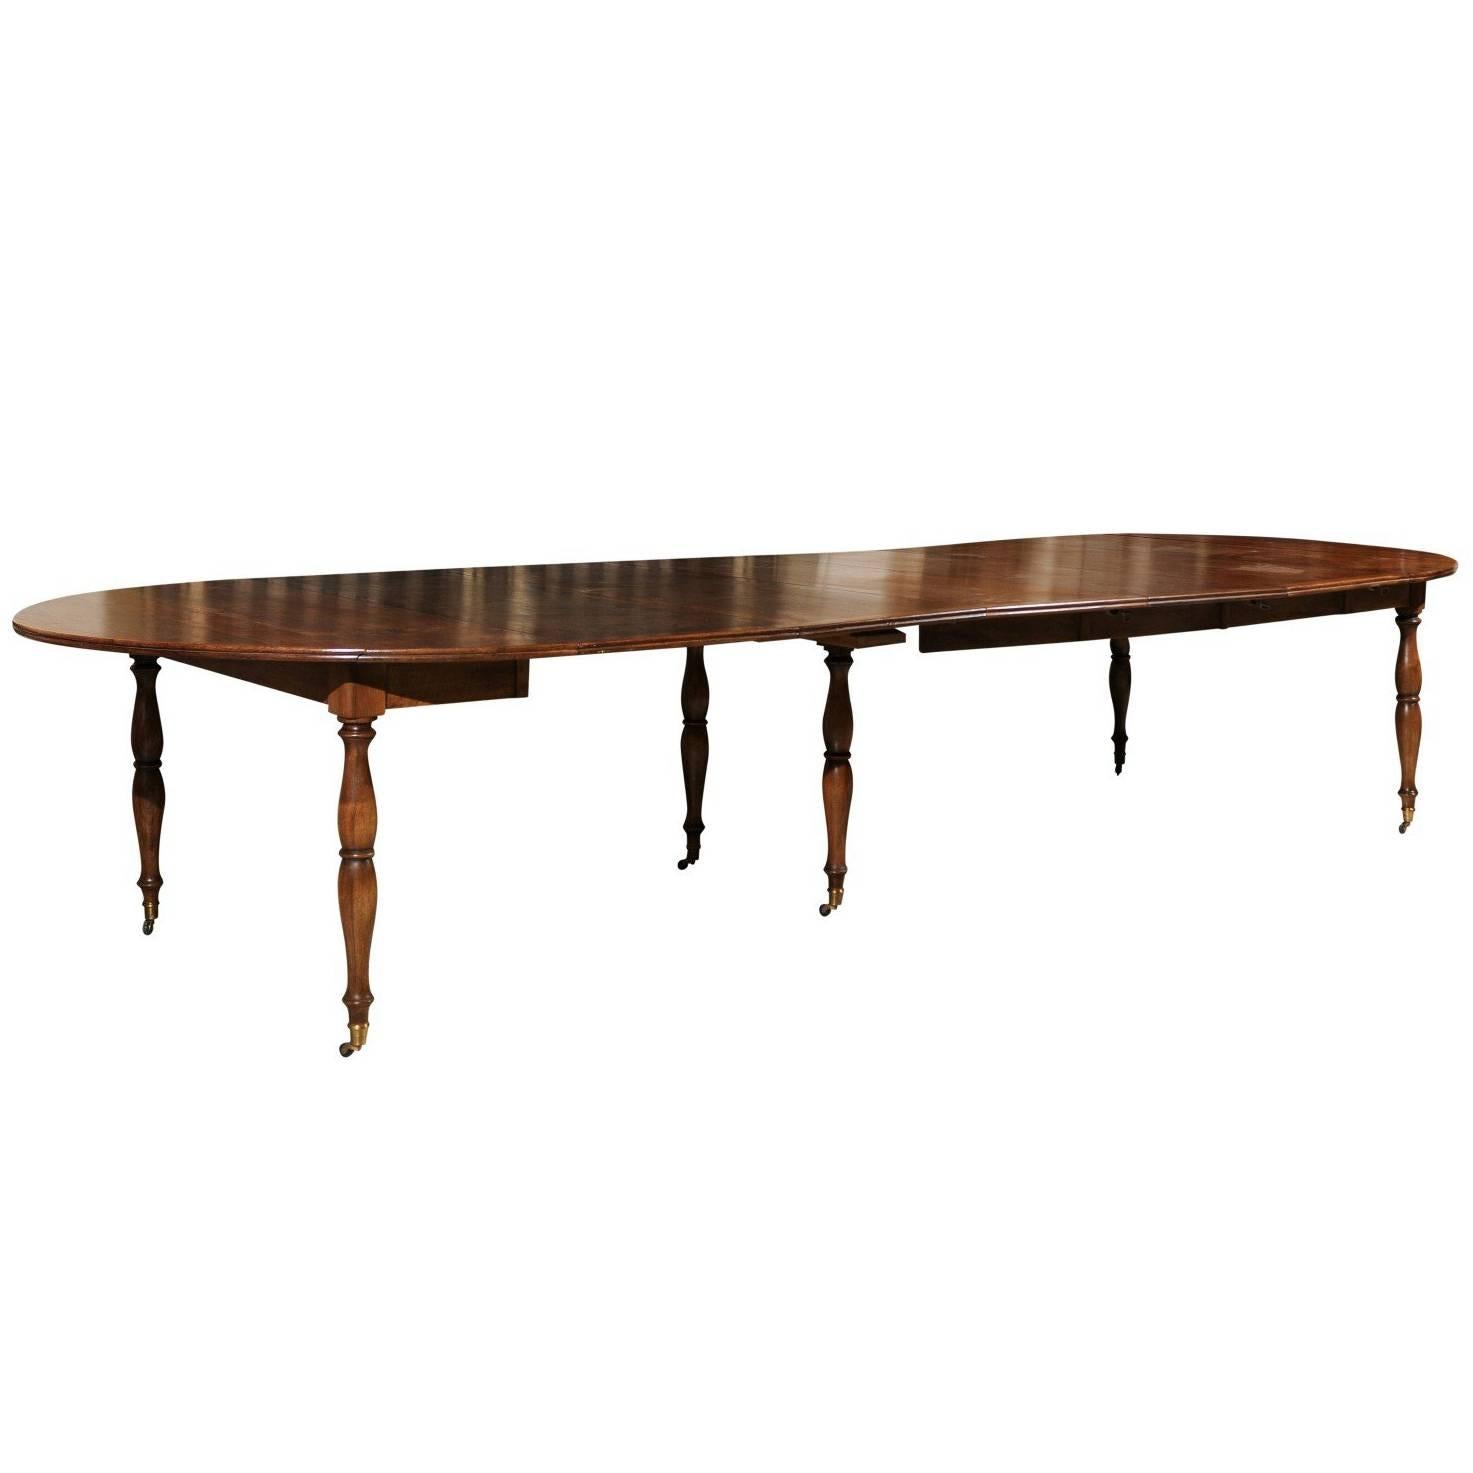 19th Century French Walnut Extension Dining Table, circa 1830